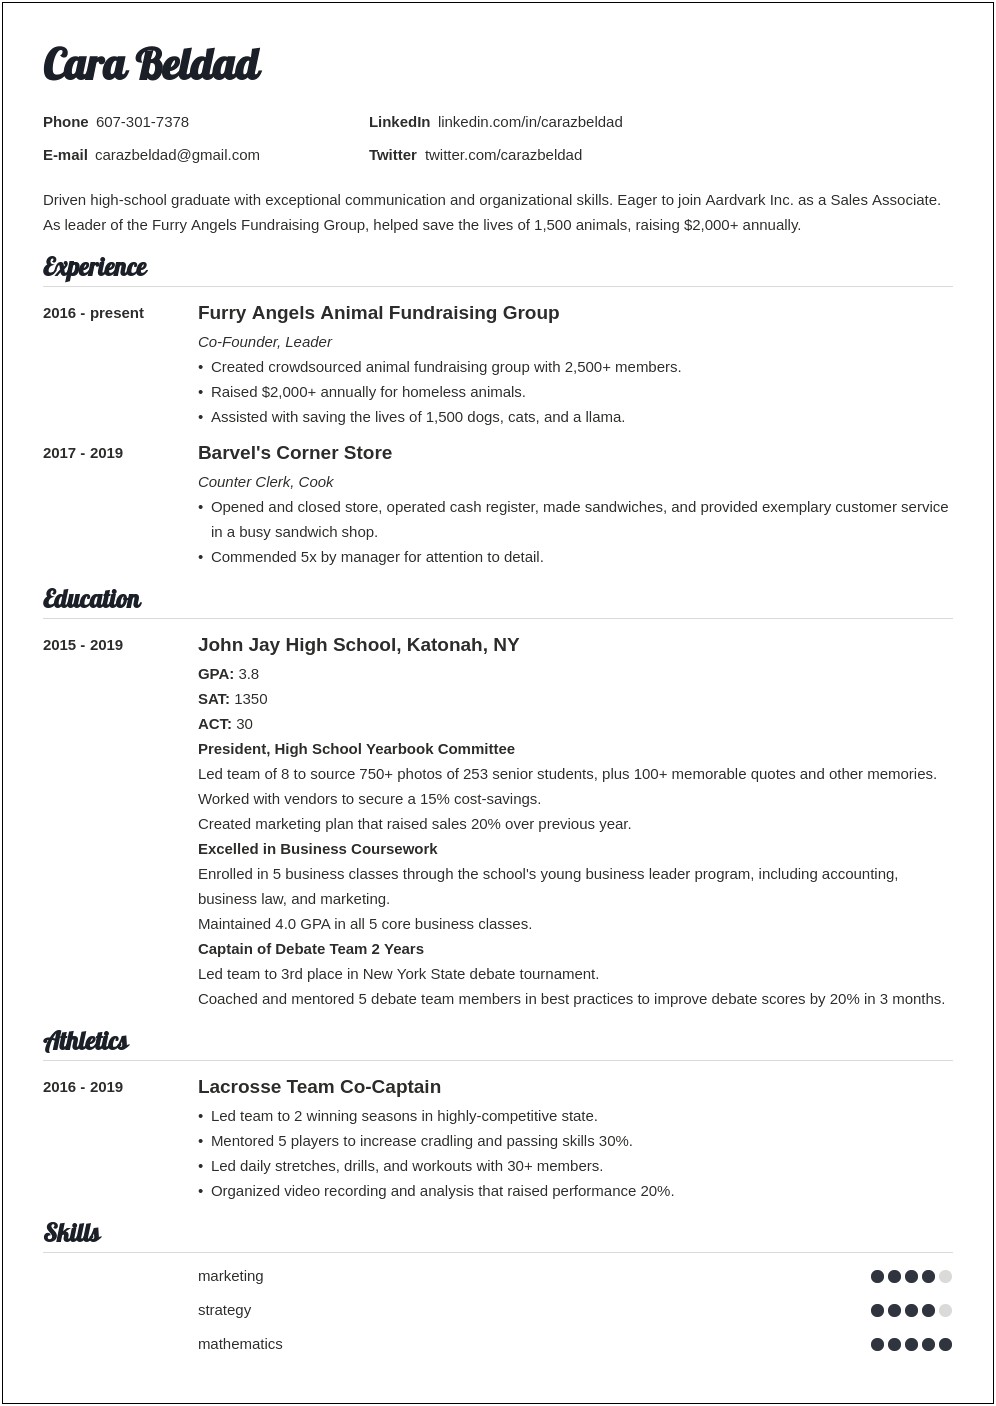 Resume Skill Section For College Student